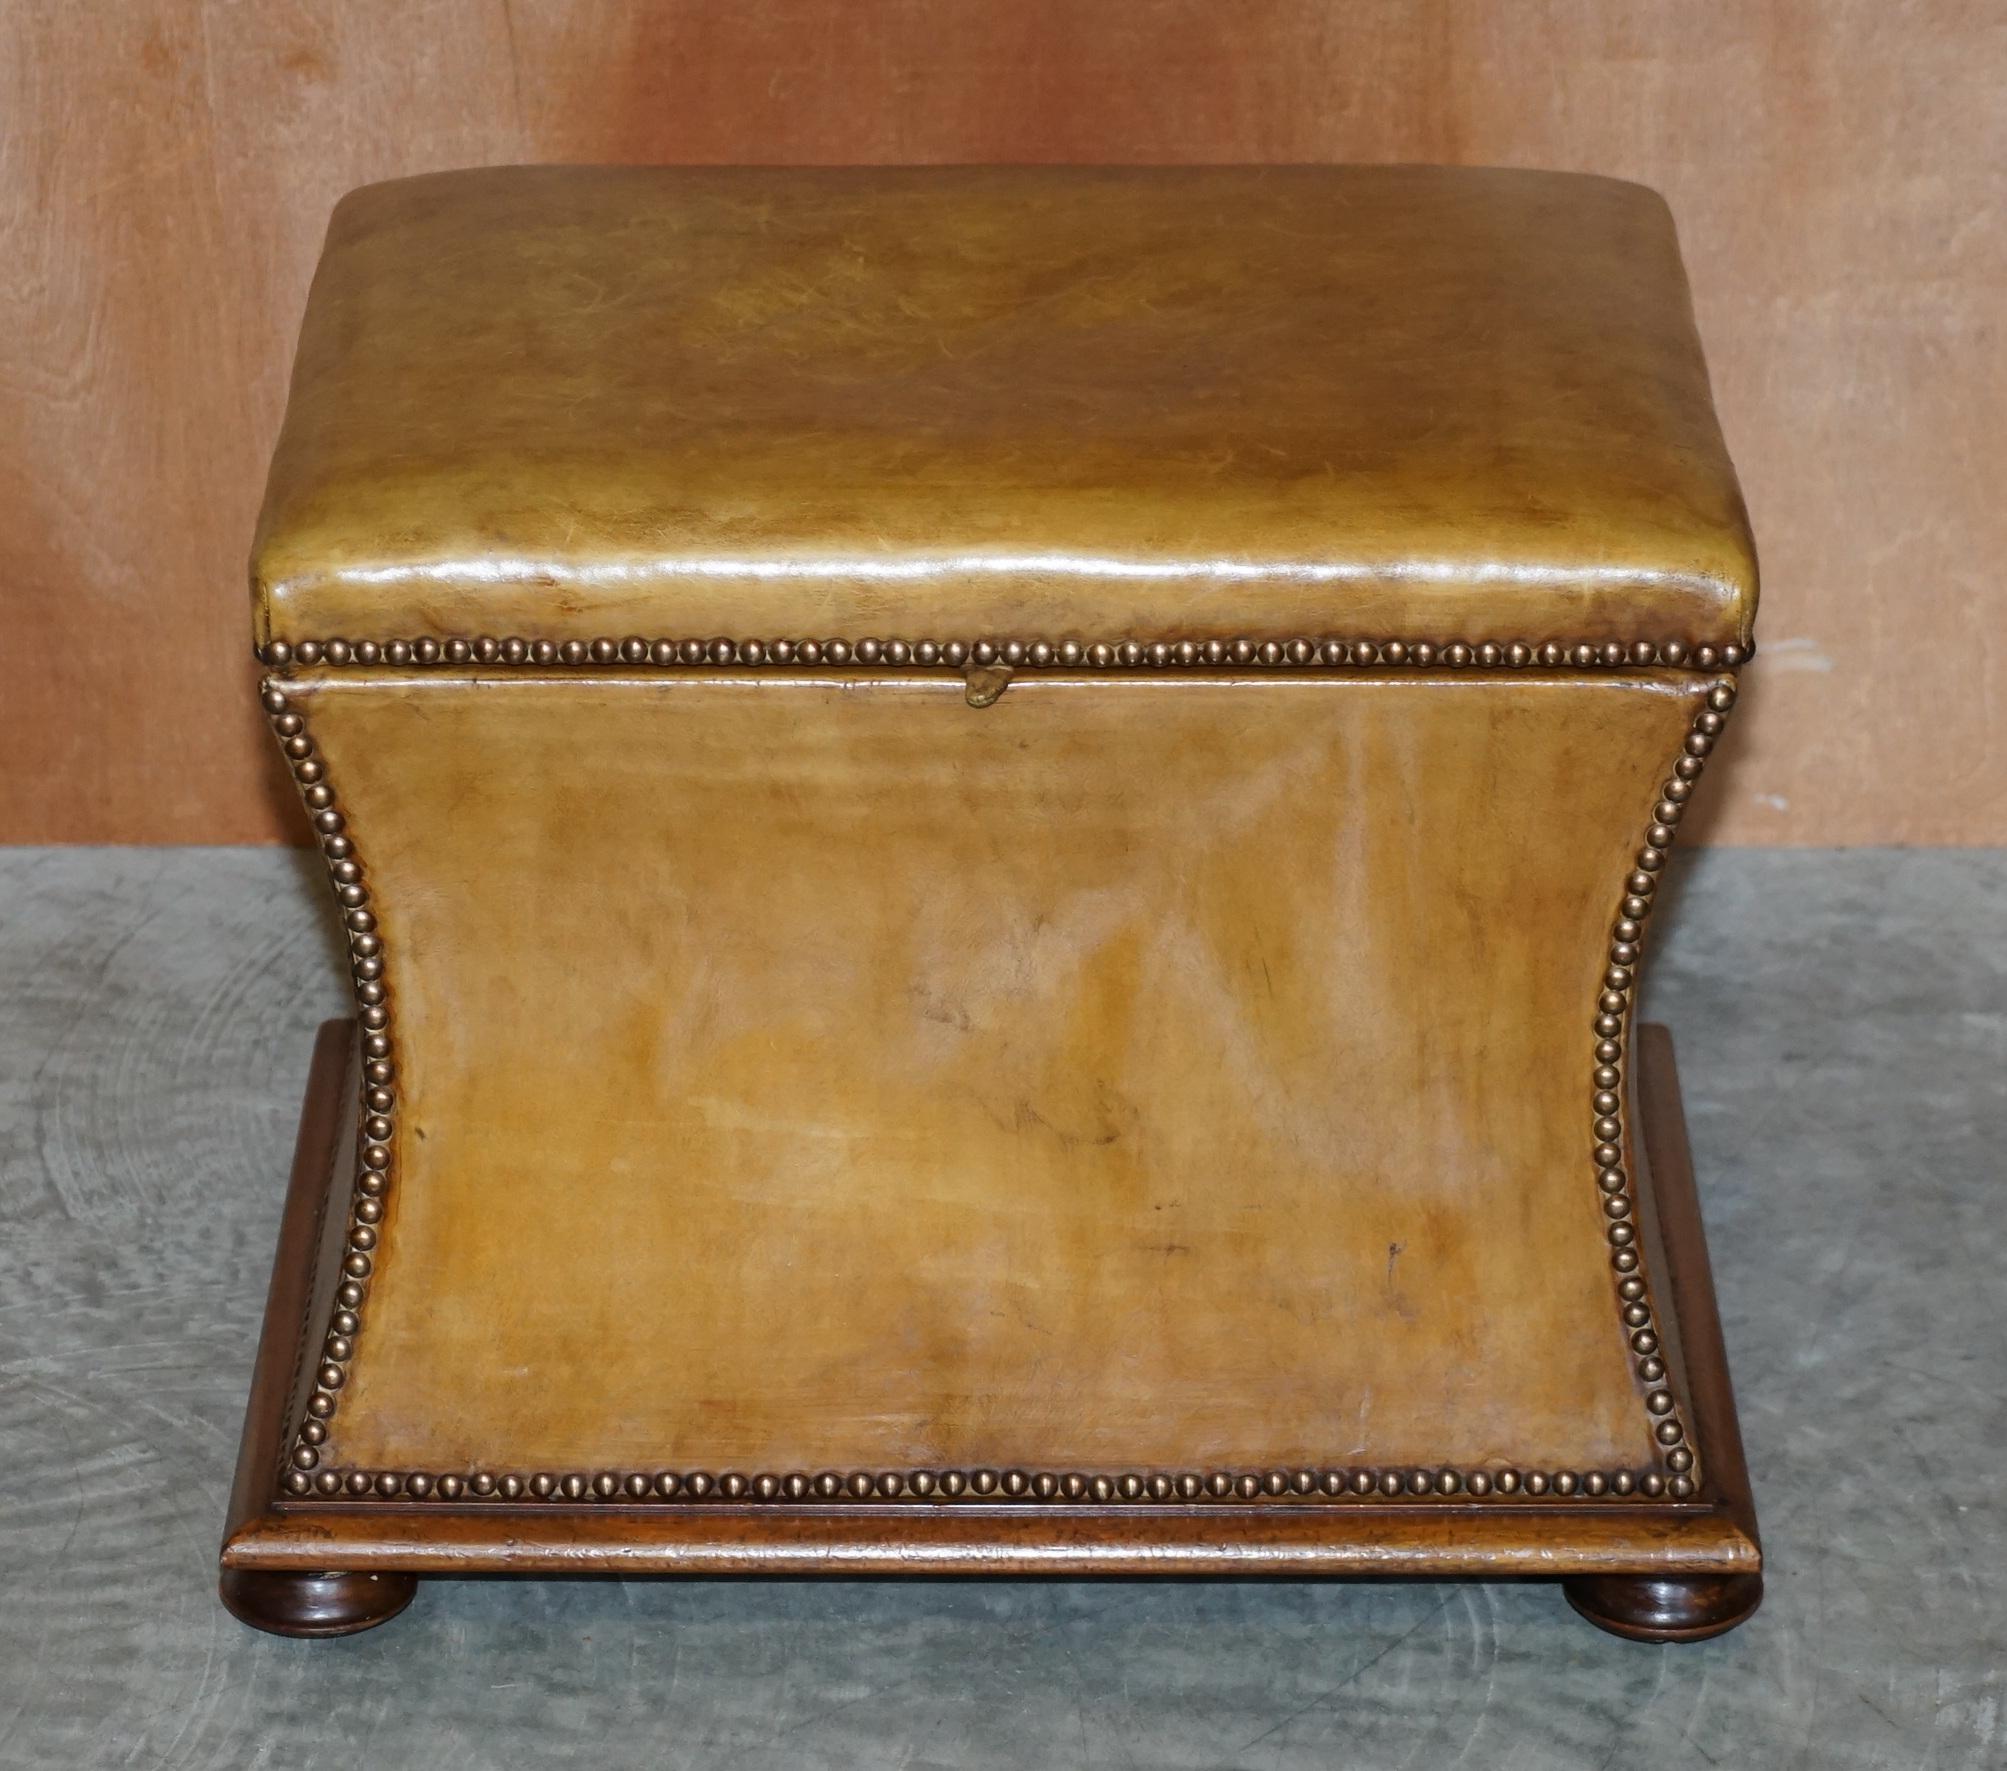 We are delighted to offer this lovely original Victorian tan brown leather and mahogany ottoman stool

A well made and good looking traditional Victorian Country House Ottoman. The frame is mahogany as was correct for the period, its upholstered